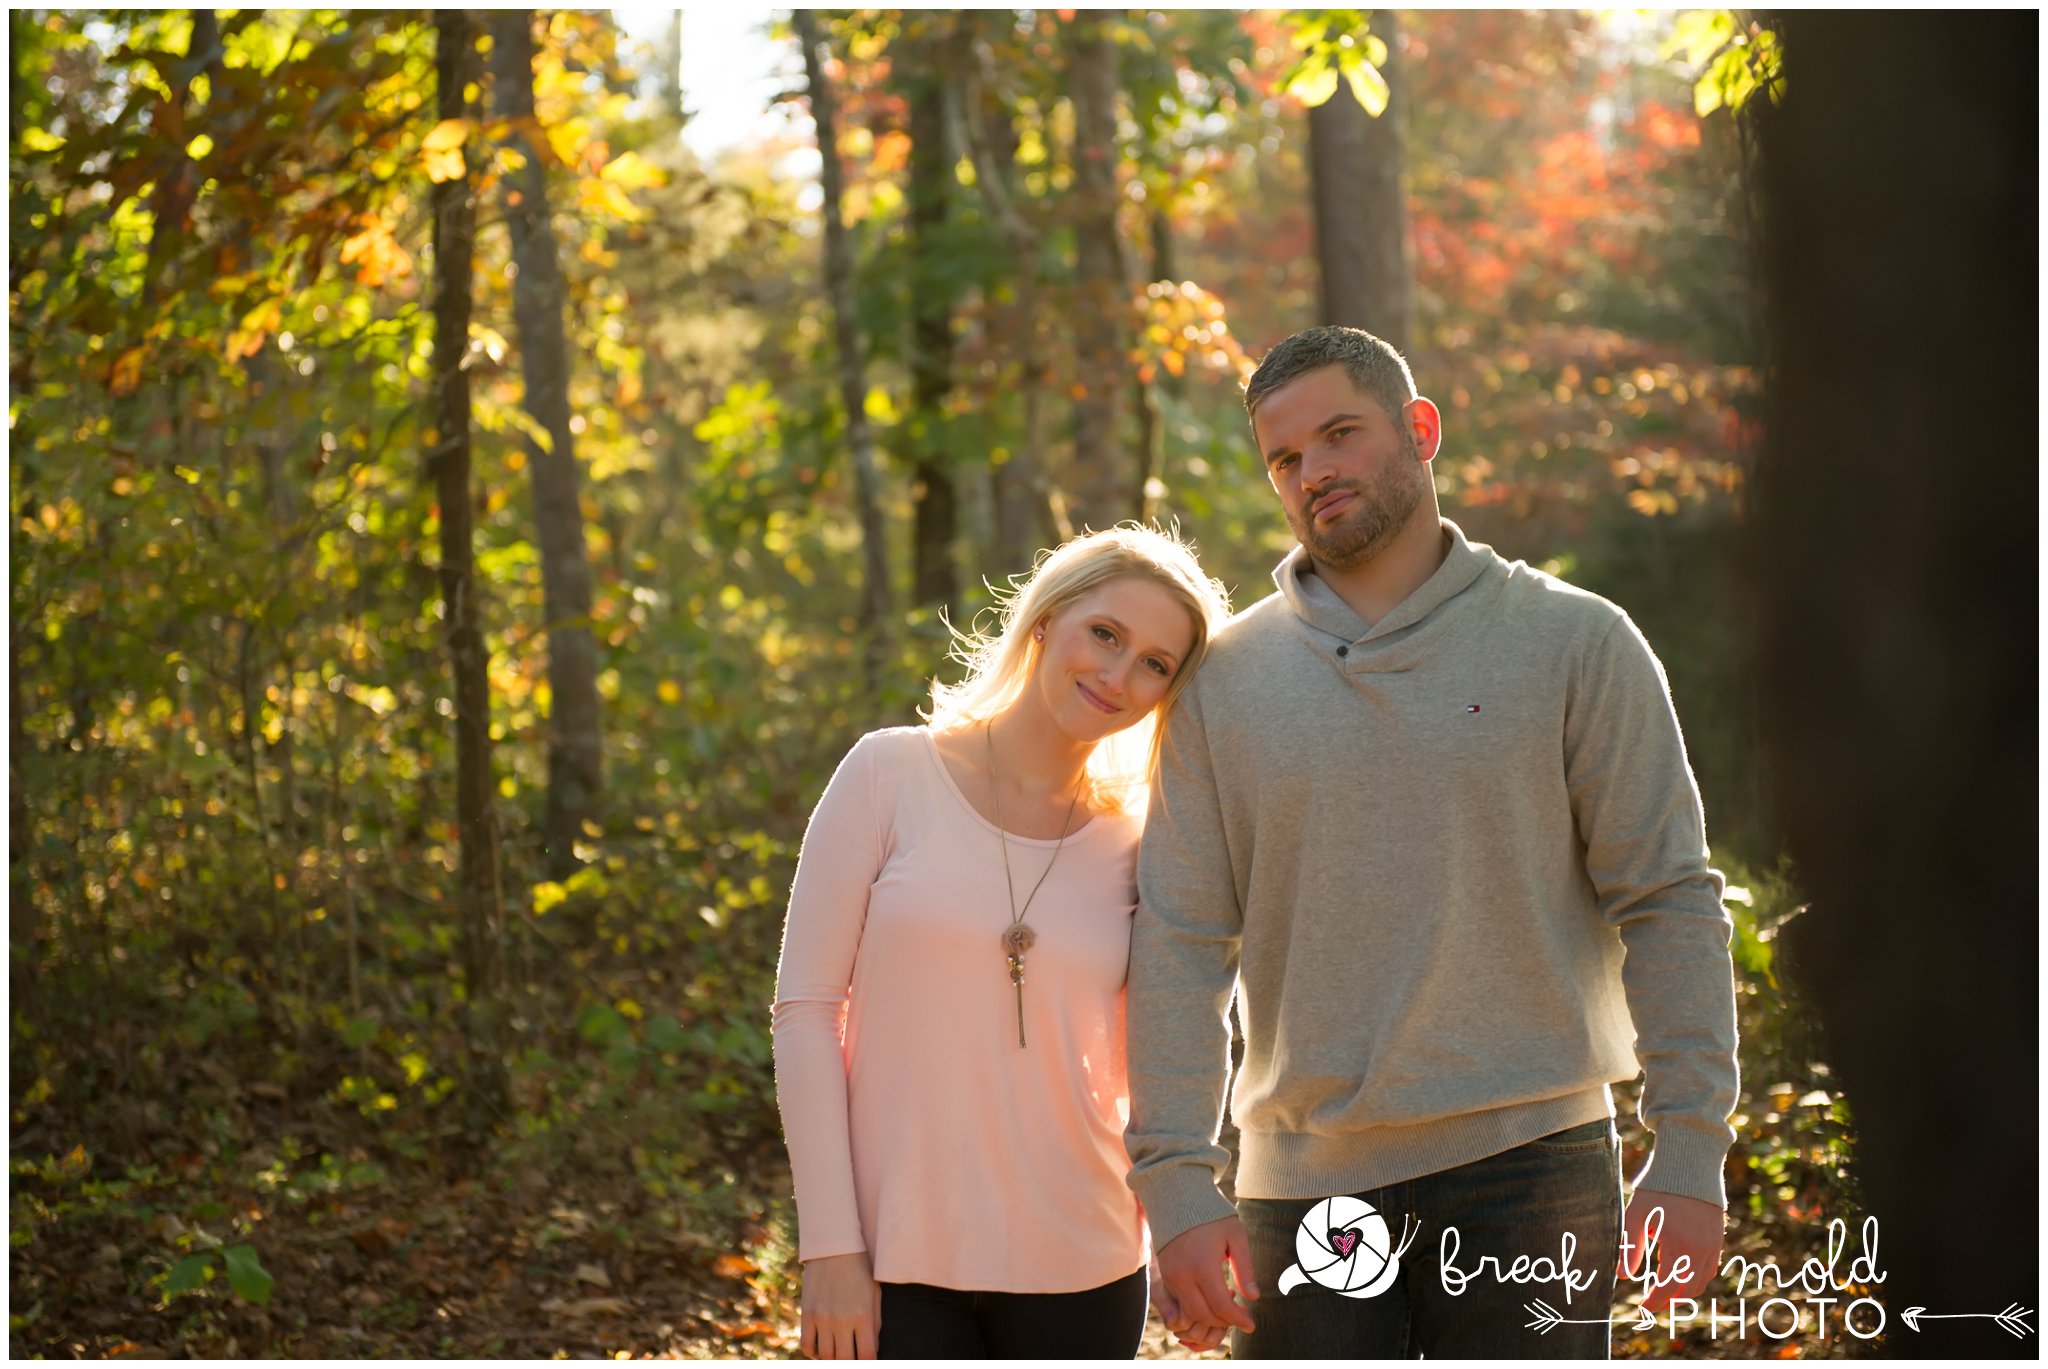 break-the-mold-photo-knoxville-tn-lenoir-city-downtown-outdoor-hiking-engagement-session_2006.jpg